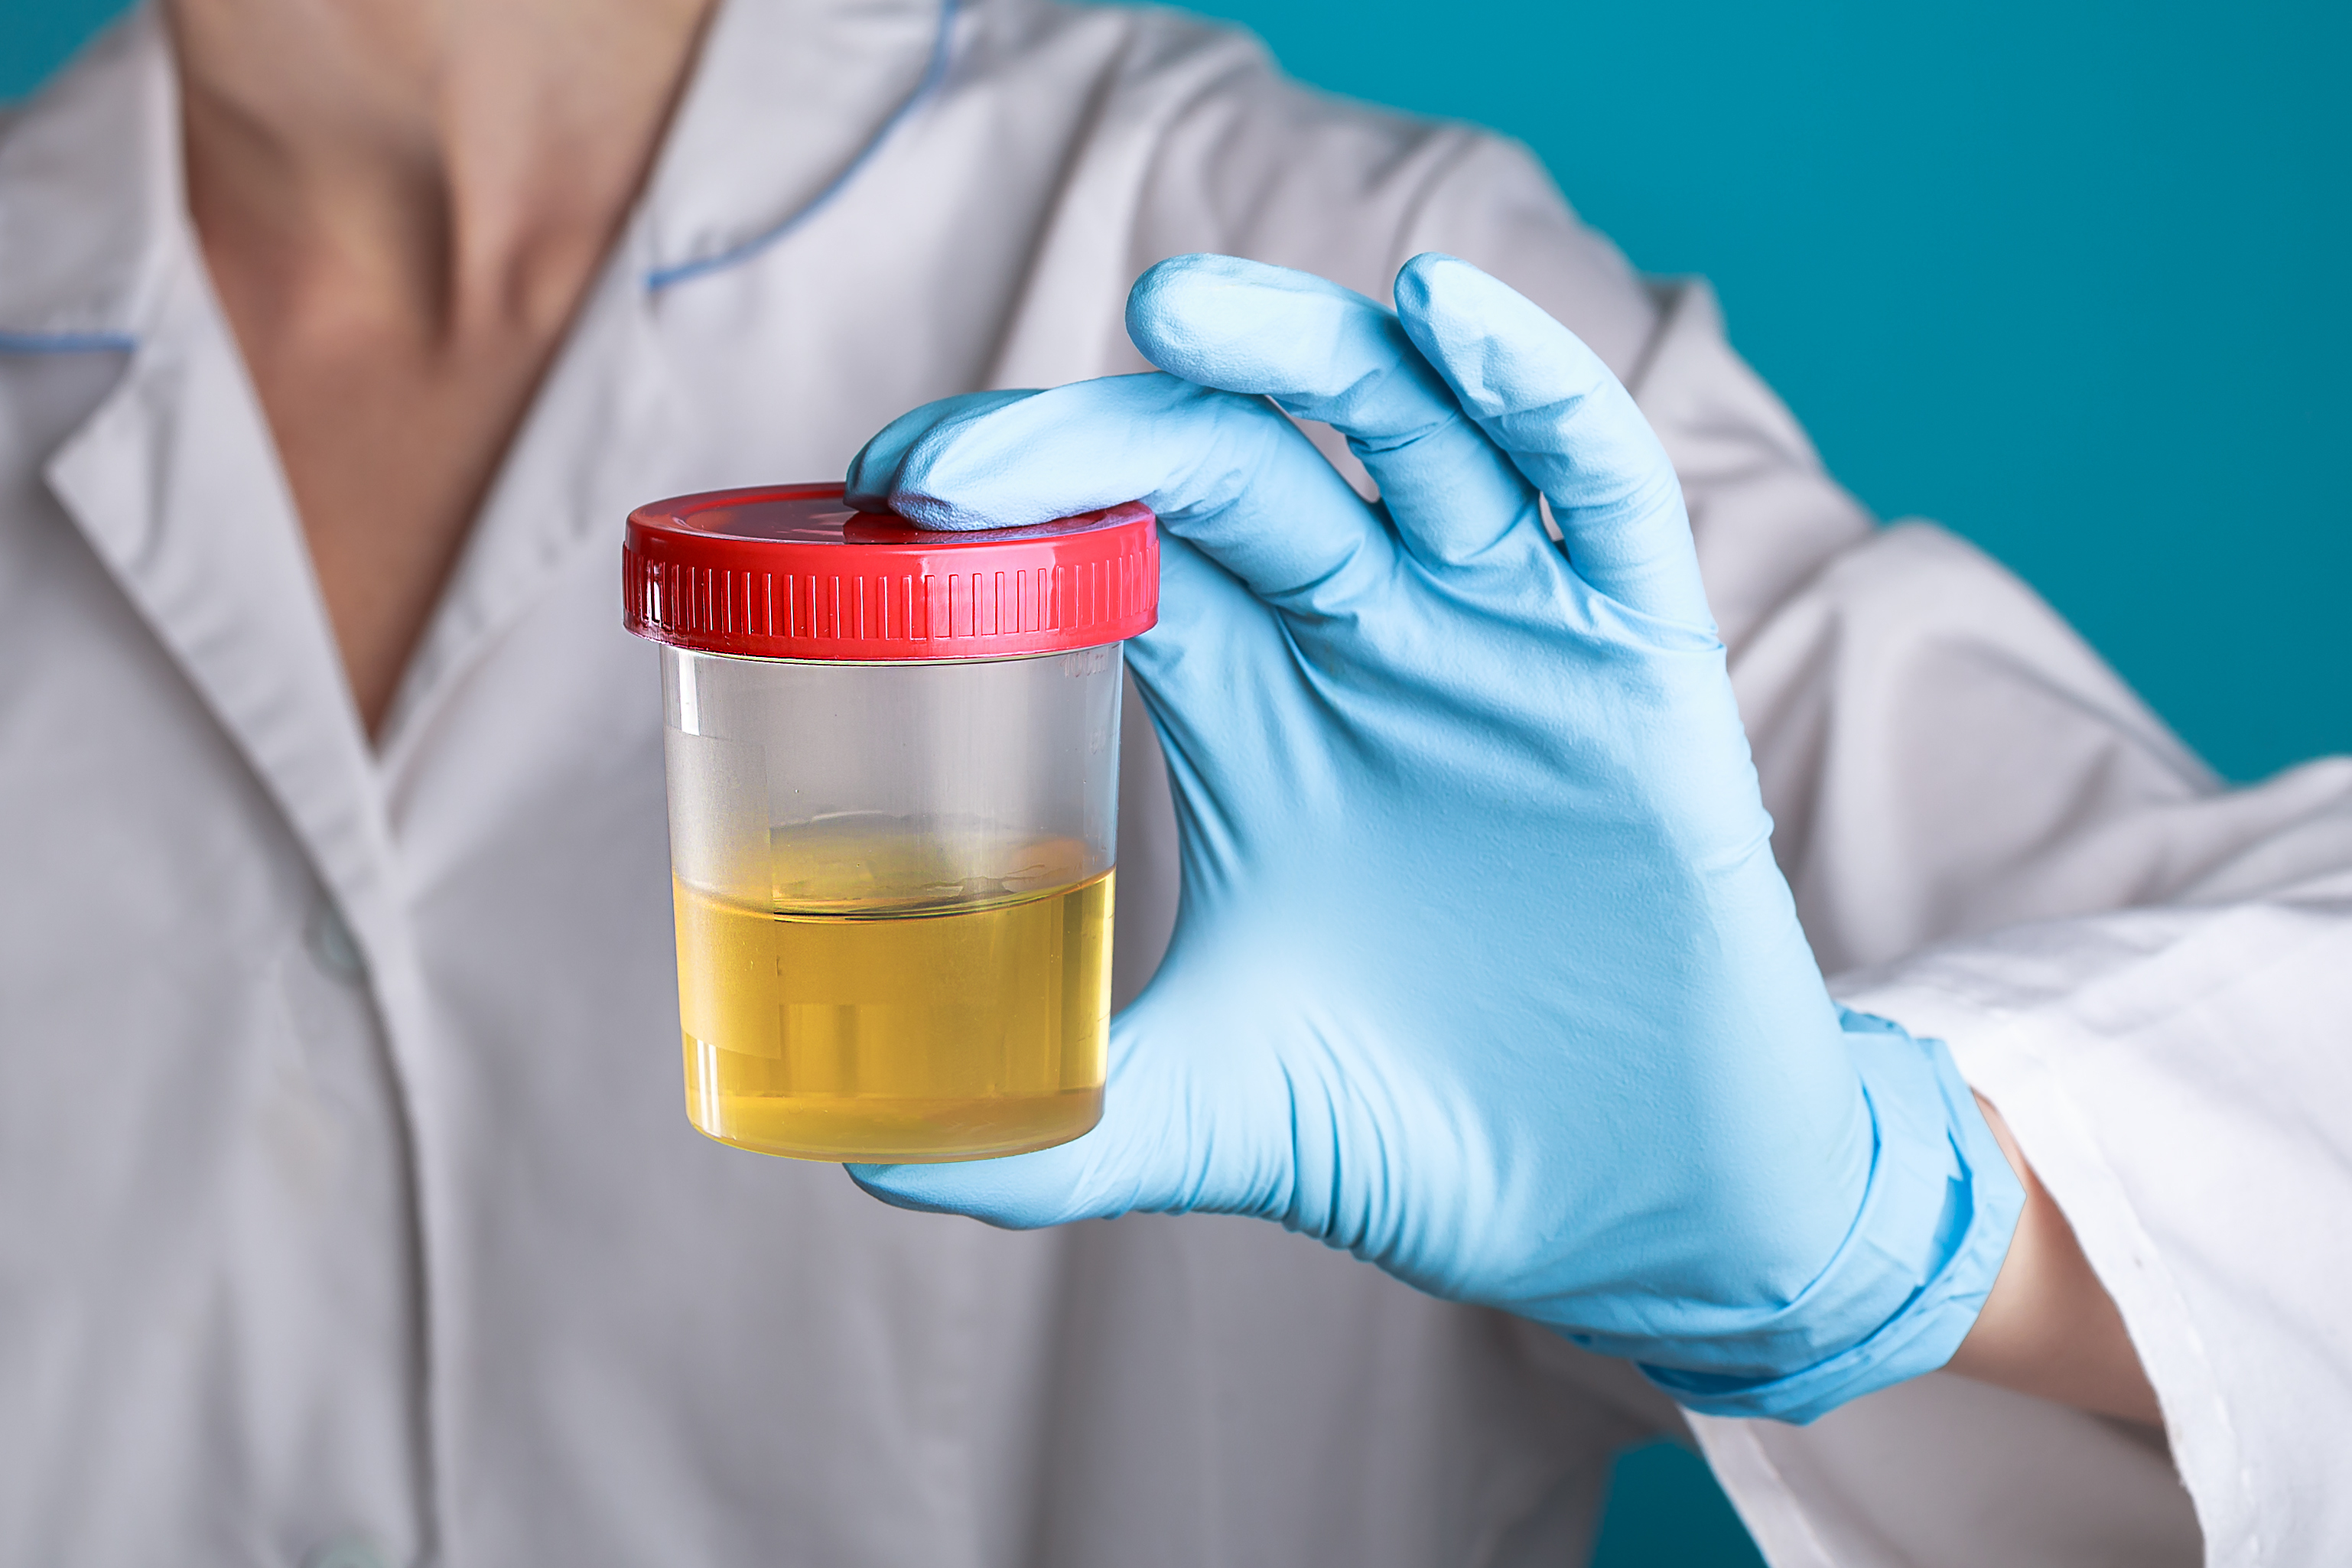 Lab technician in gloves holding a container of urine for analysis